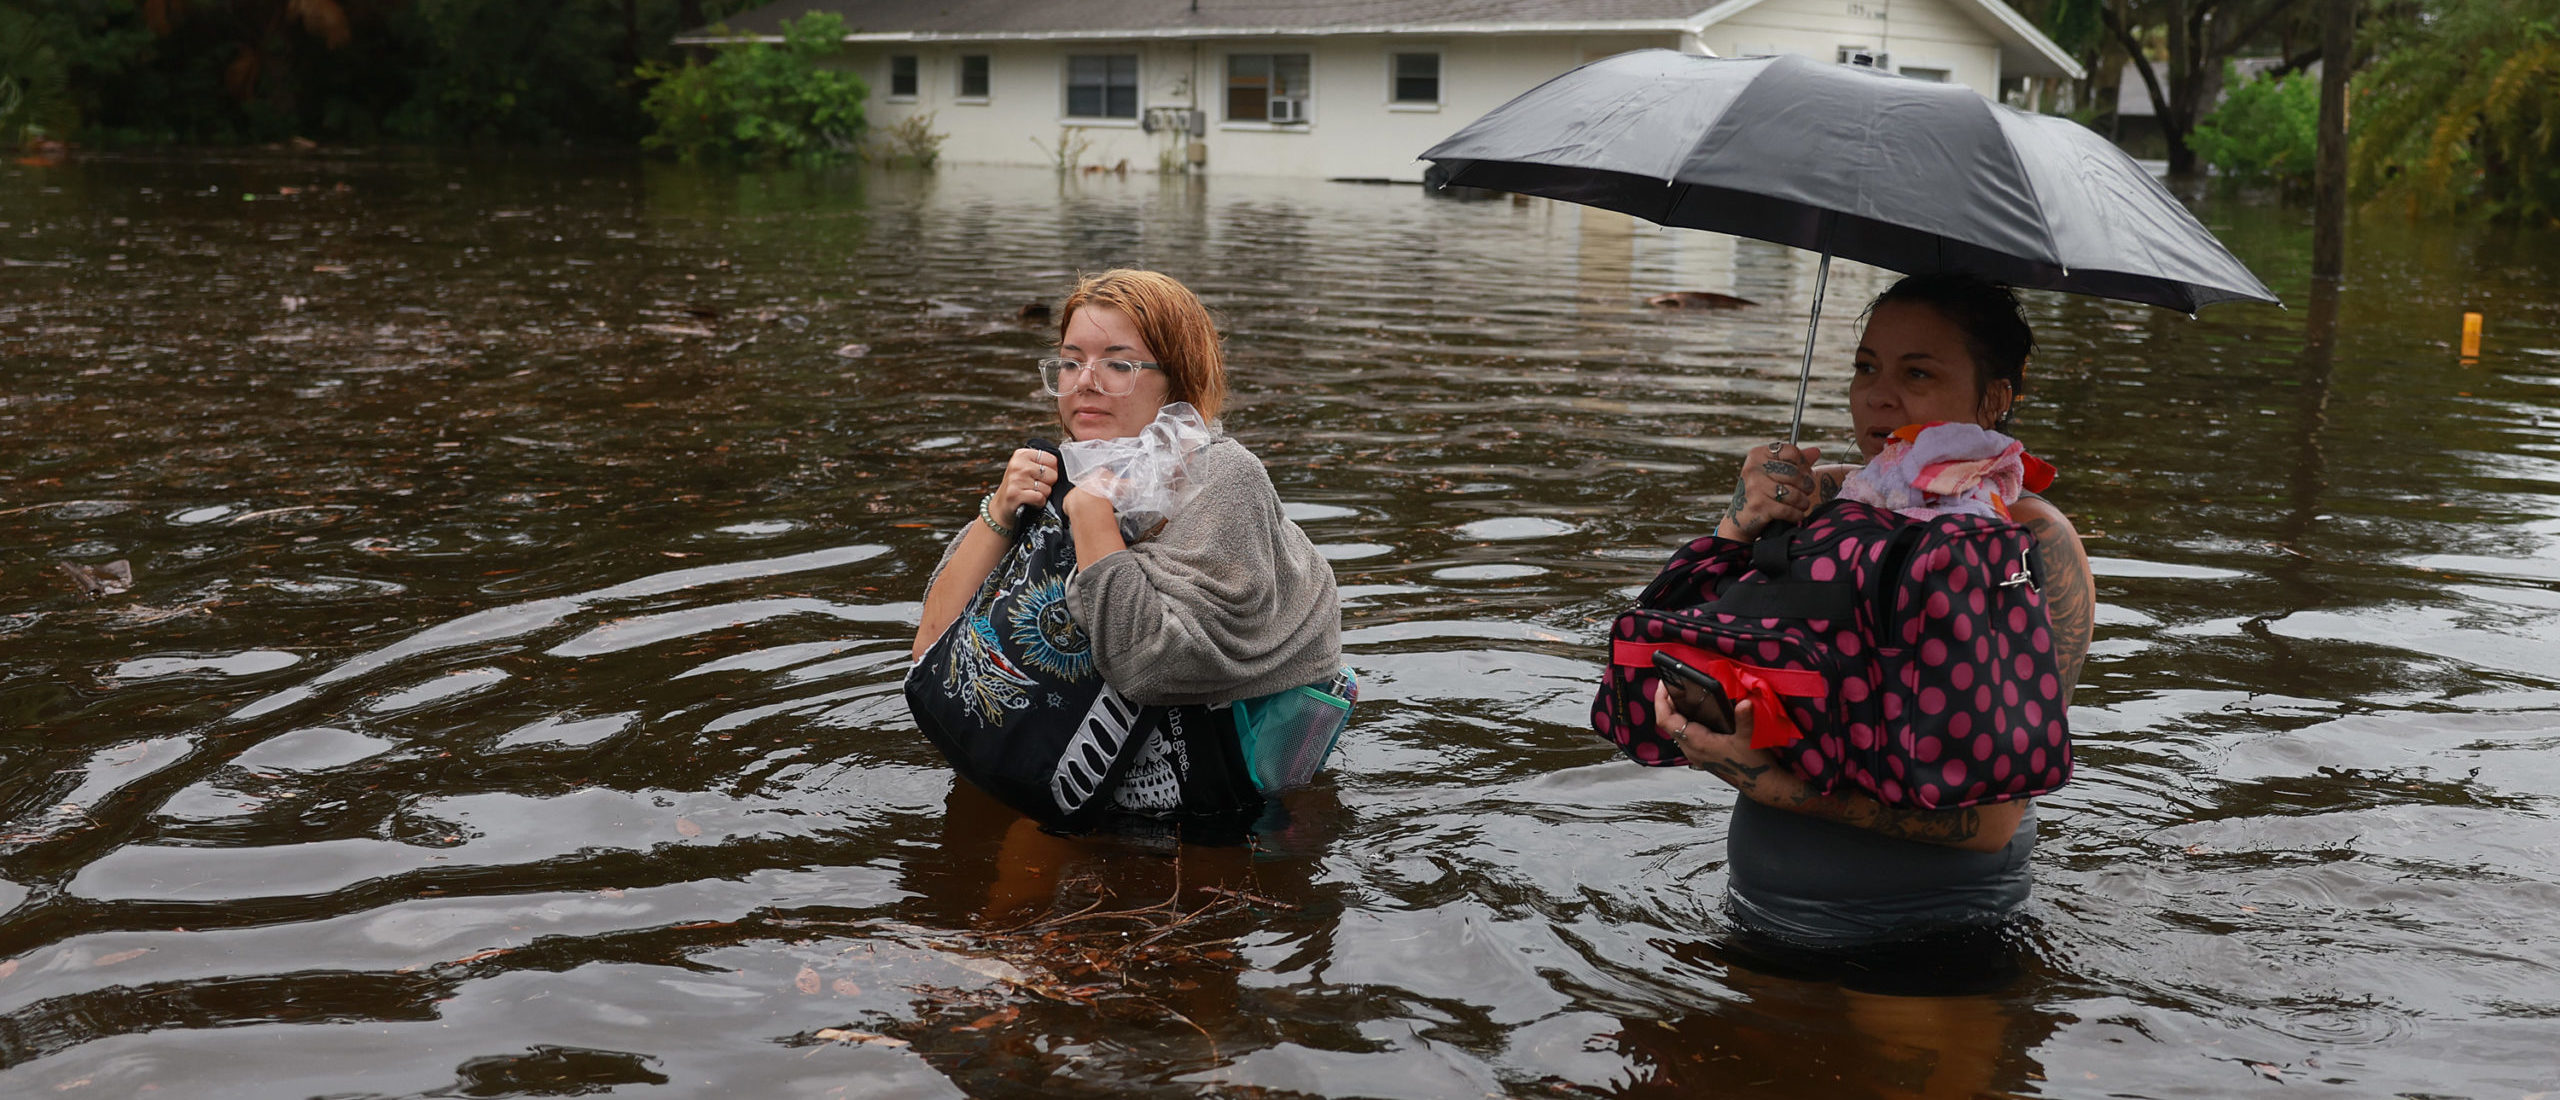 TARPON SPRINGS, FLORIDA - AUGUST 30: Makatla Ritchter (L) and her mother, Keiphra Line wade through flood waters after having to evacuate their home when the flood waters from Hurricane Idalia inundated it on August 30, 2023 in Tarpon Springs, Florida. Hurricane Idalia is hitting the Big Bend area of Florida. (Photo by Joe Raedle/Getty Images)